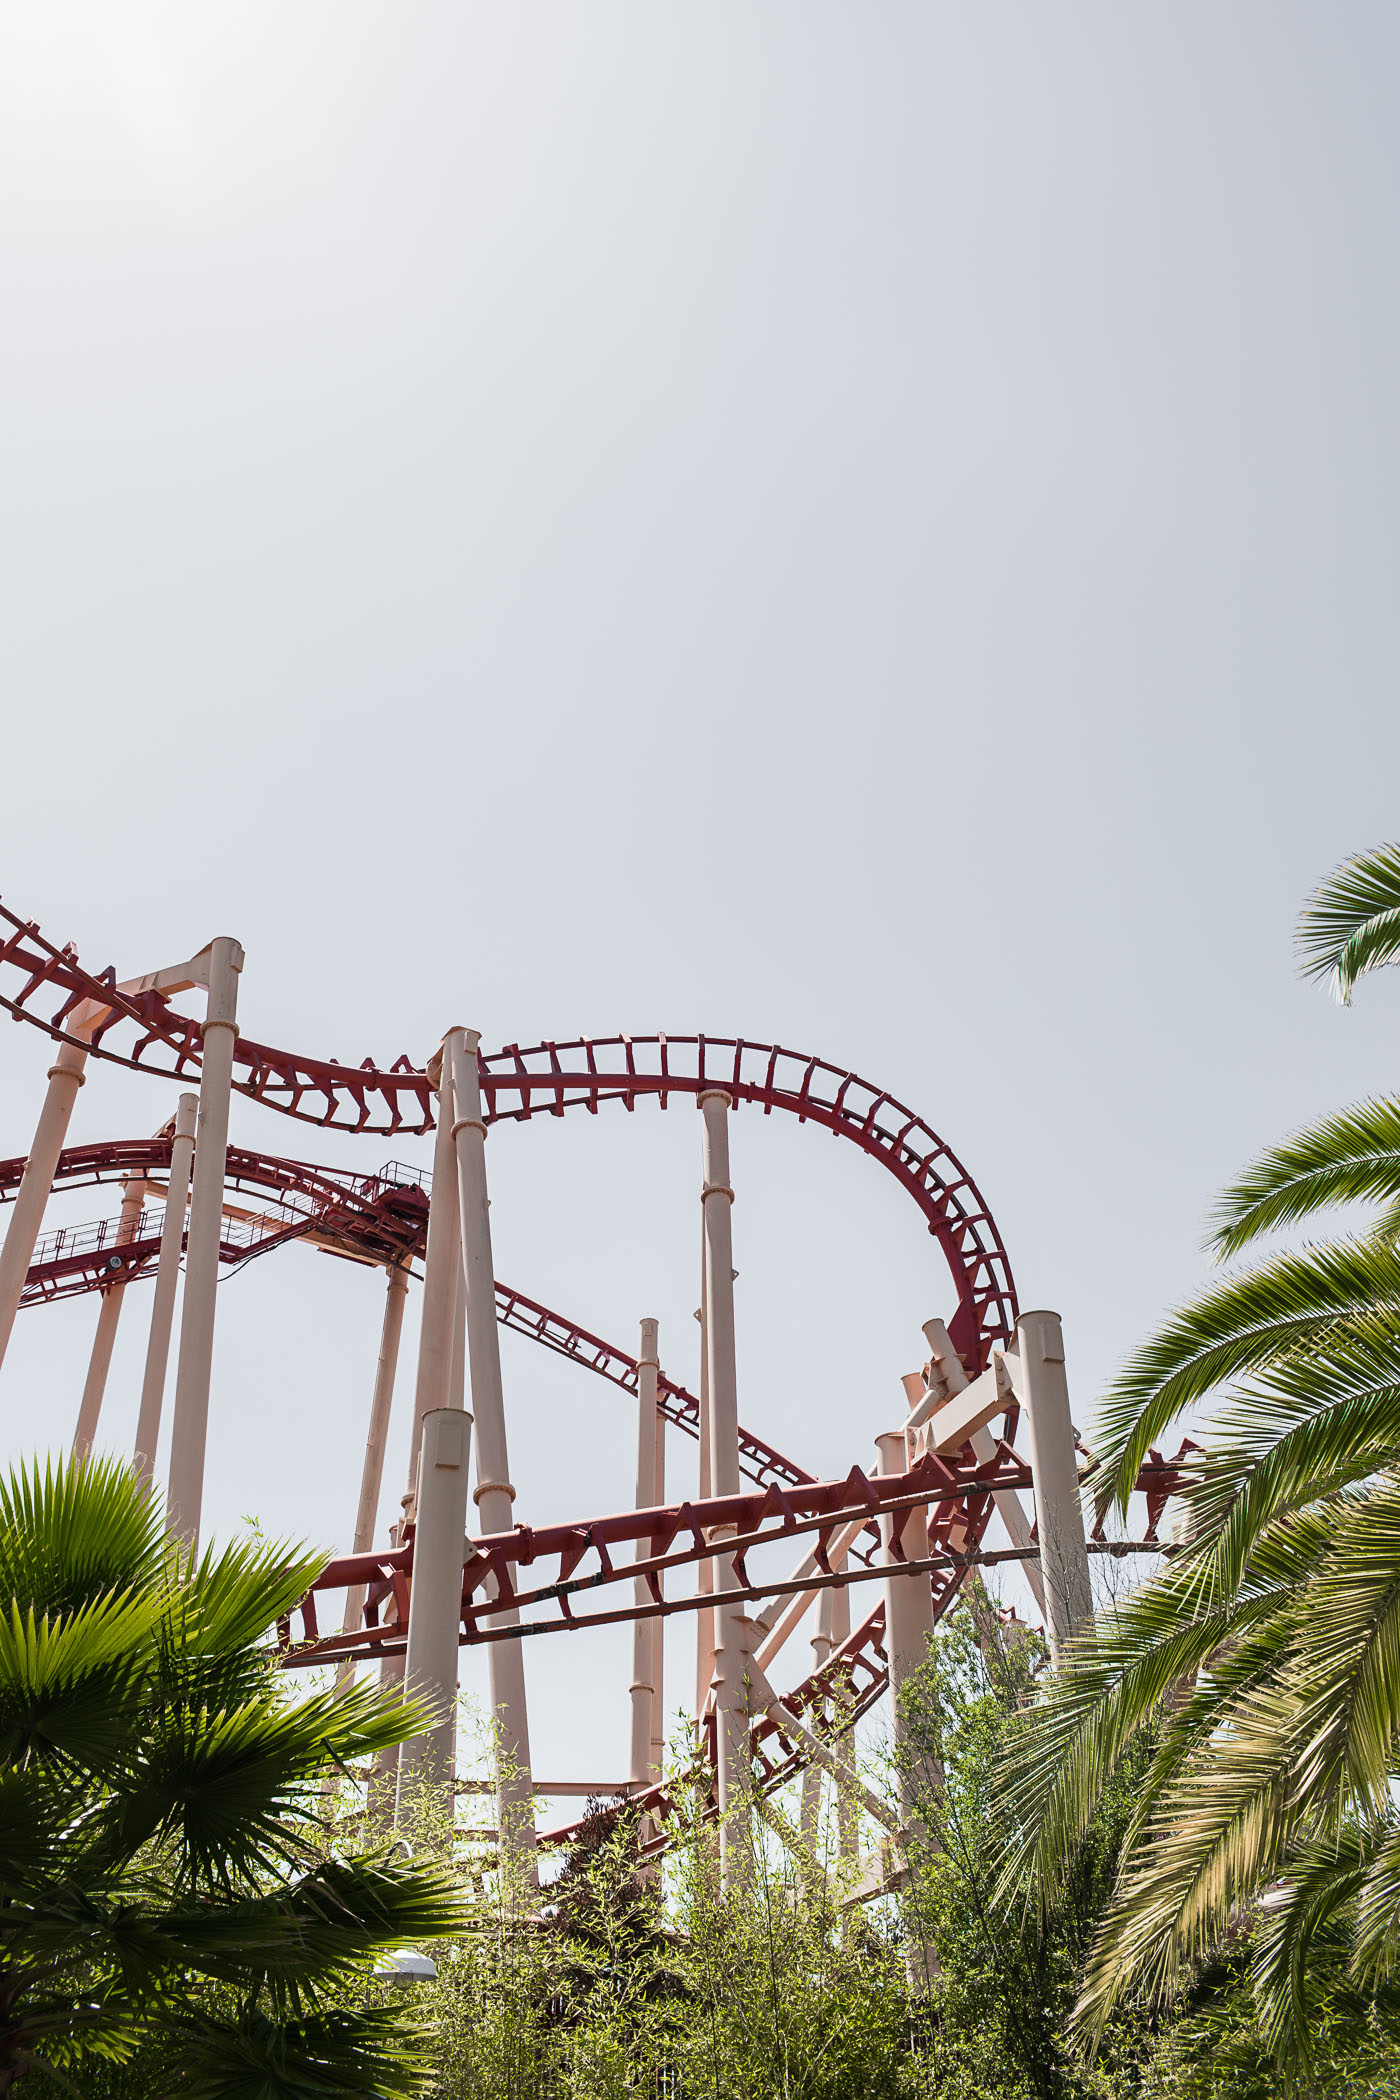 6 Tips for Visiting a Theme Park